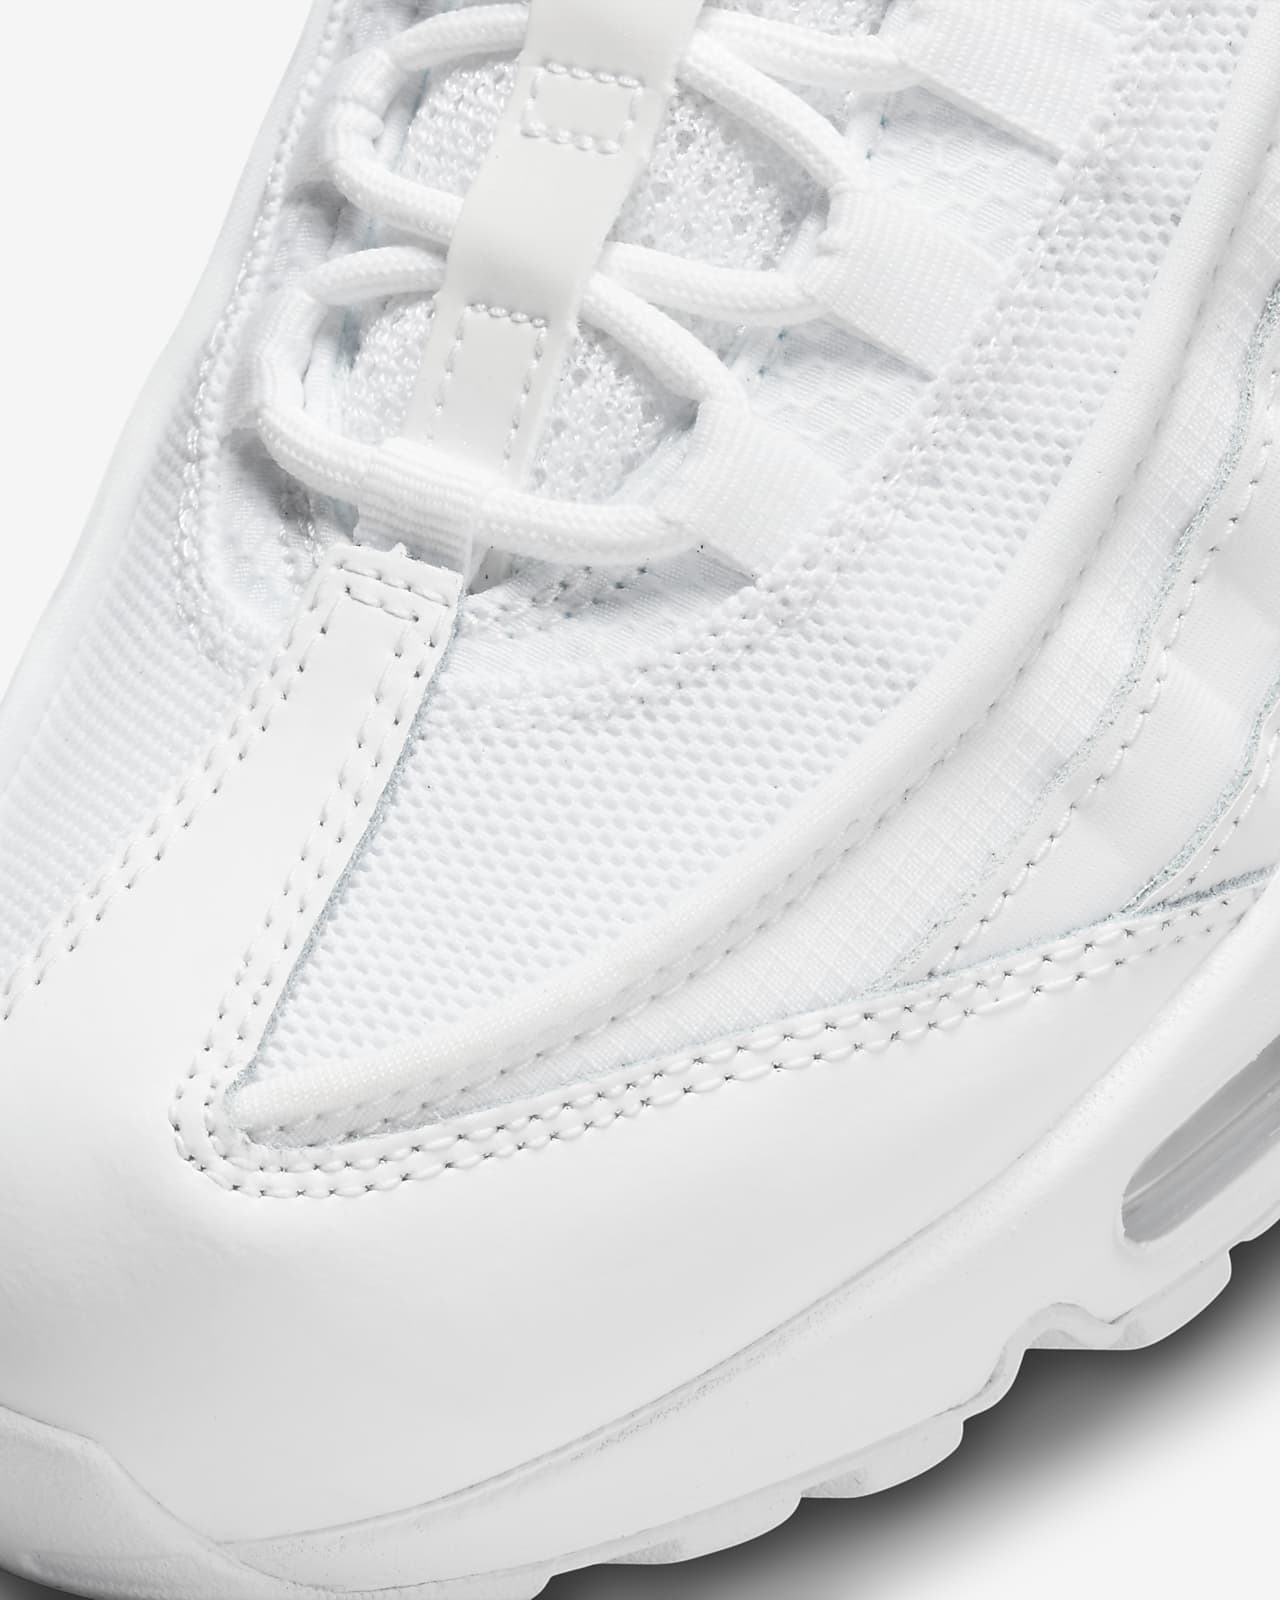 Baskets Nike Air Max 95 Essential CT1268-100 - NIKE - Homme - Blanc -  Lacets - Plat - Synthétique